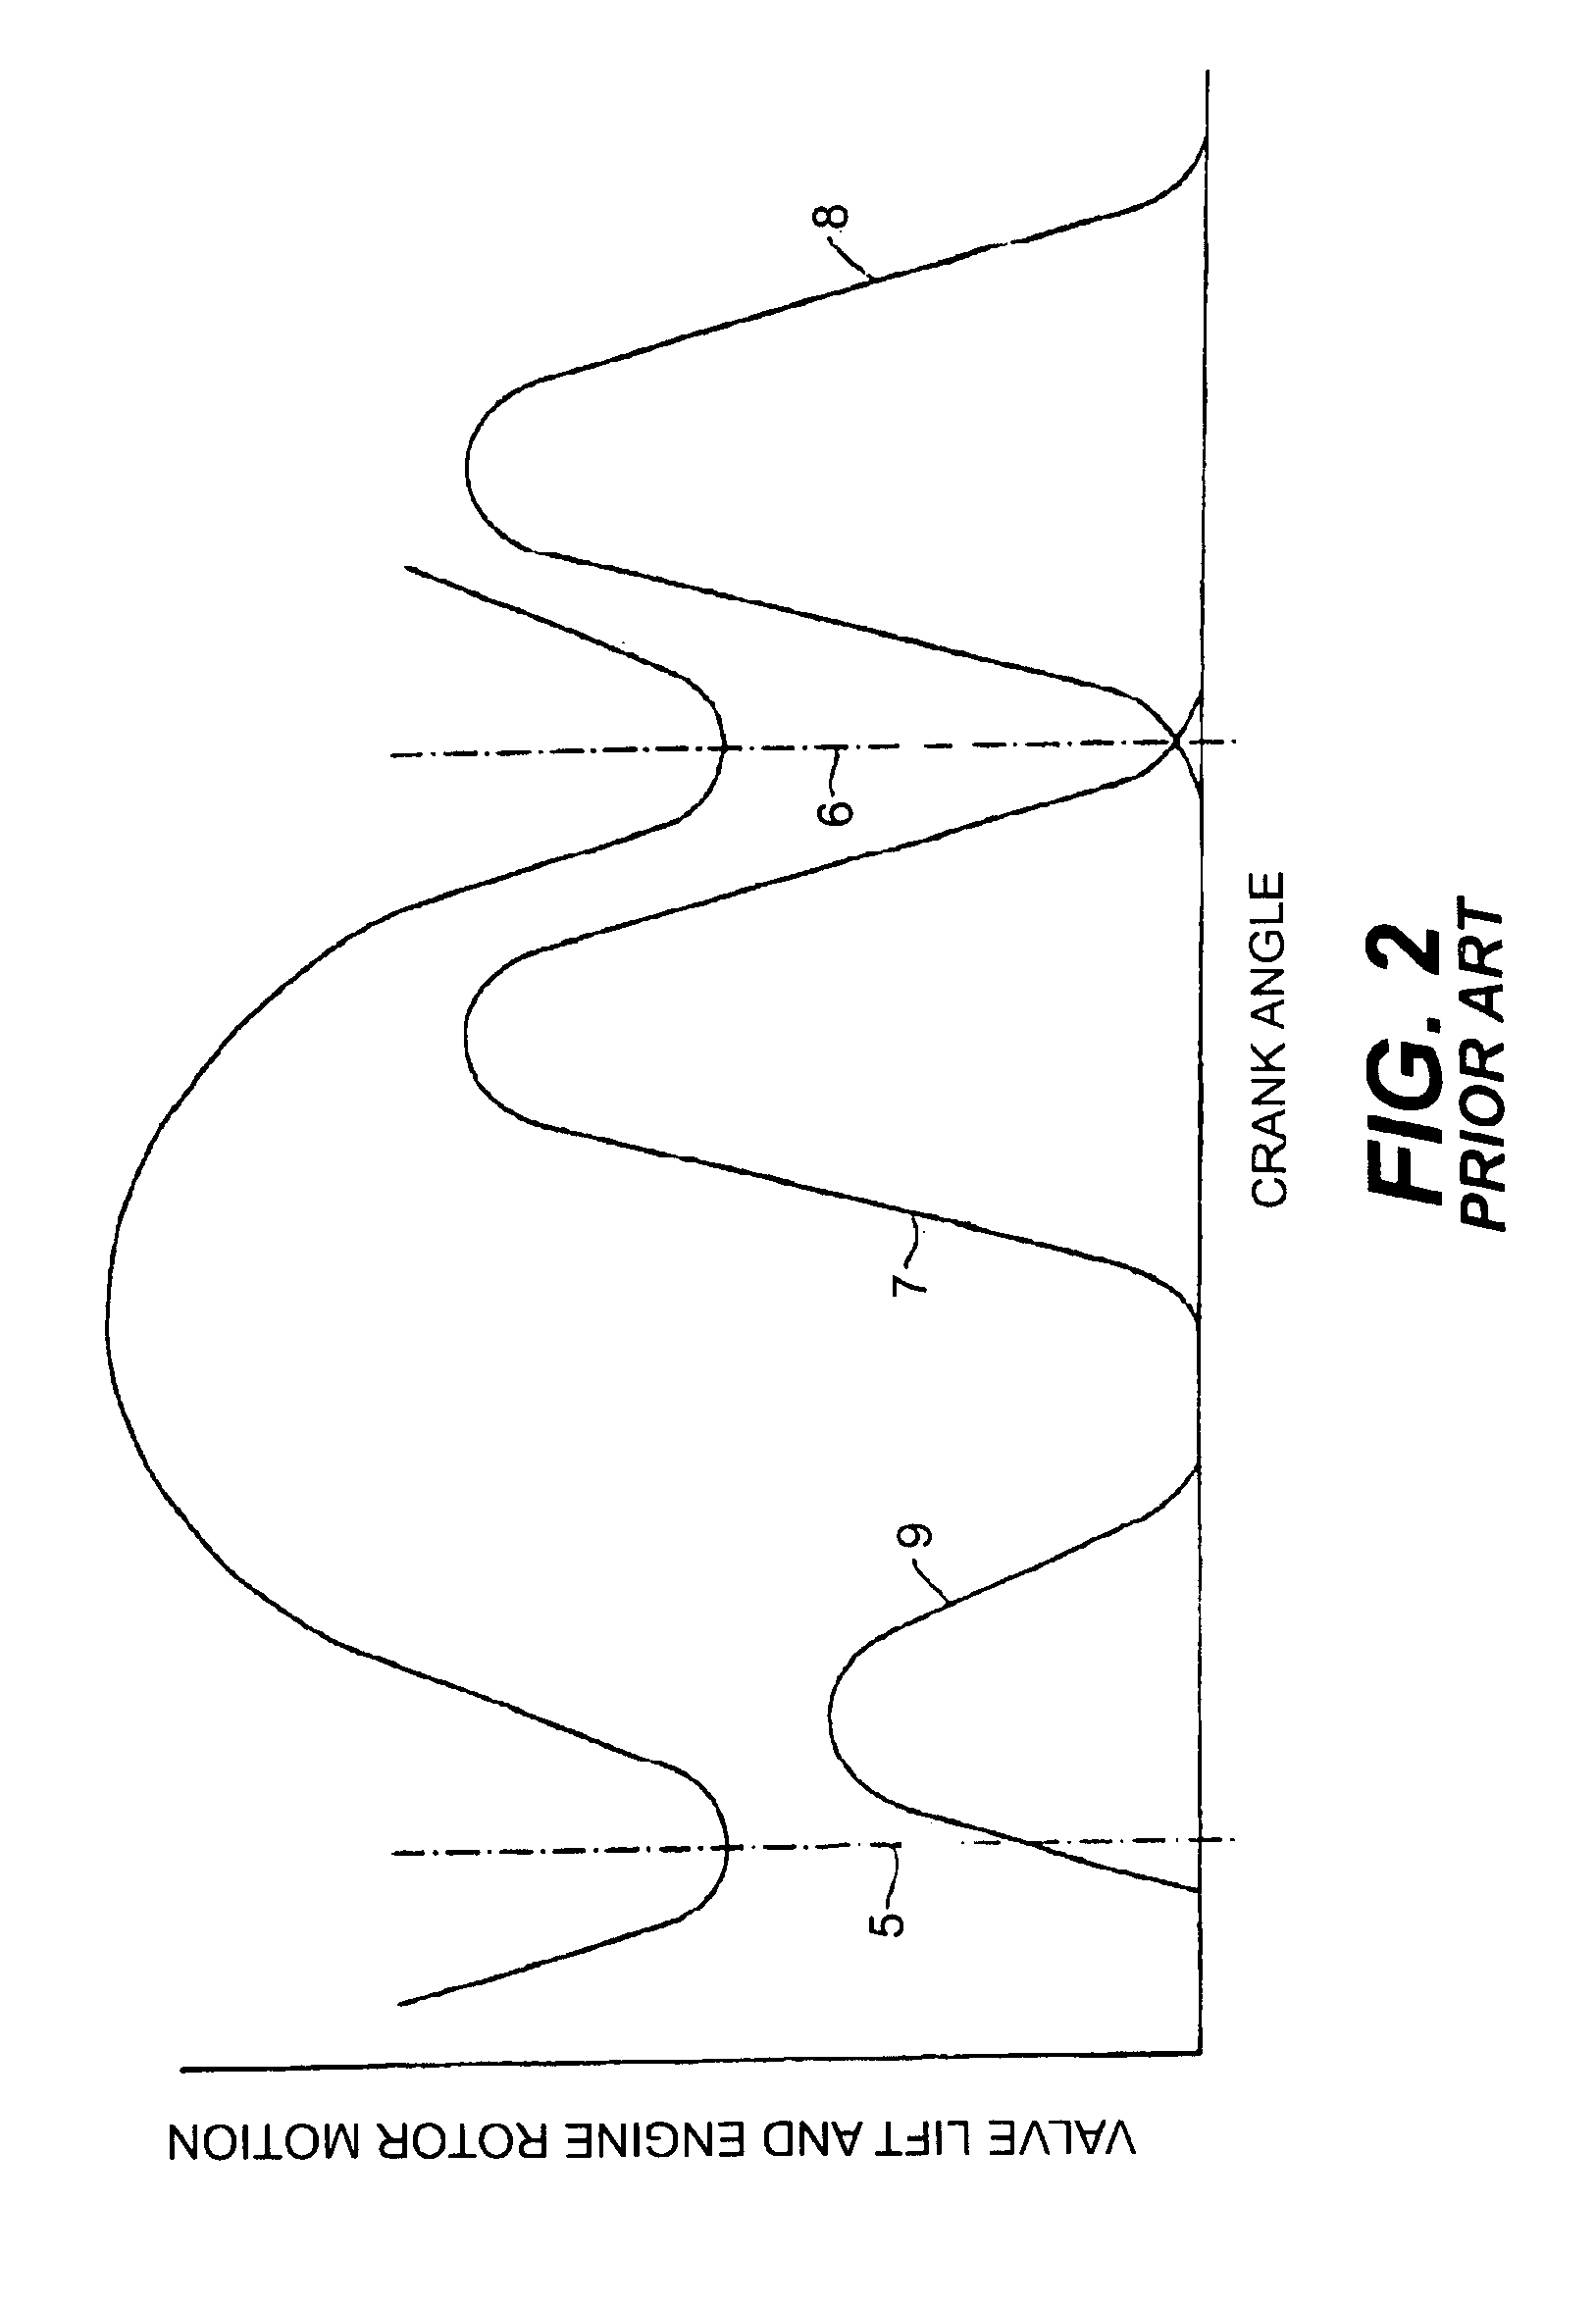 Multi-cycle, engine braking with positive power valve actuation control system and process for using the same